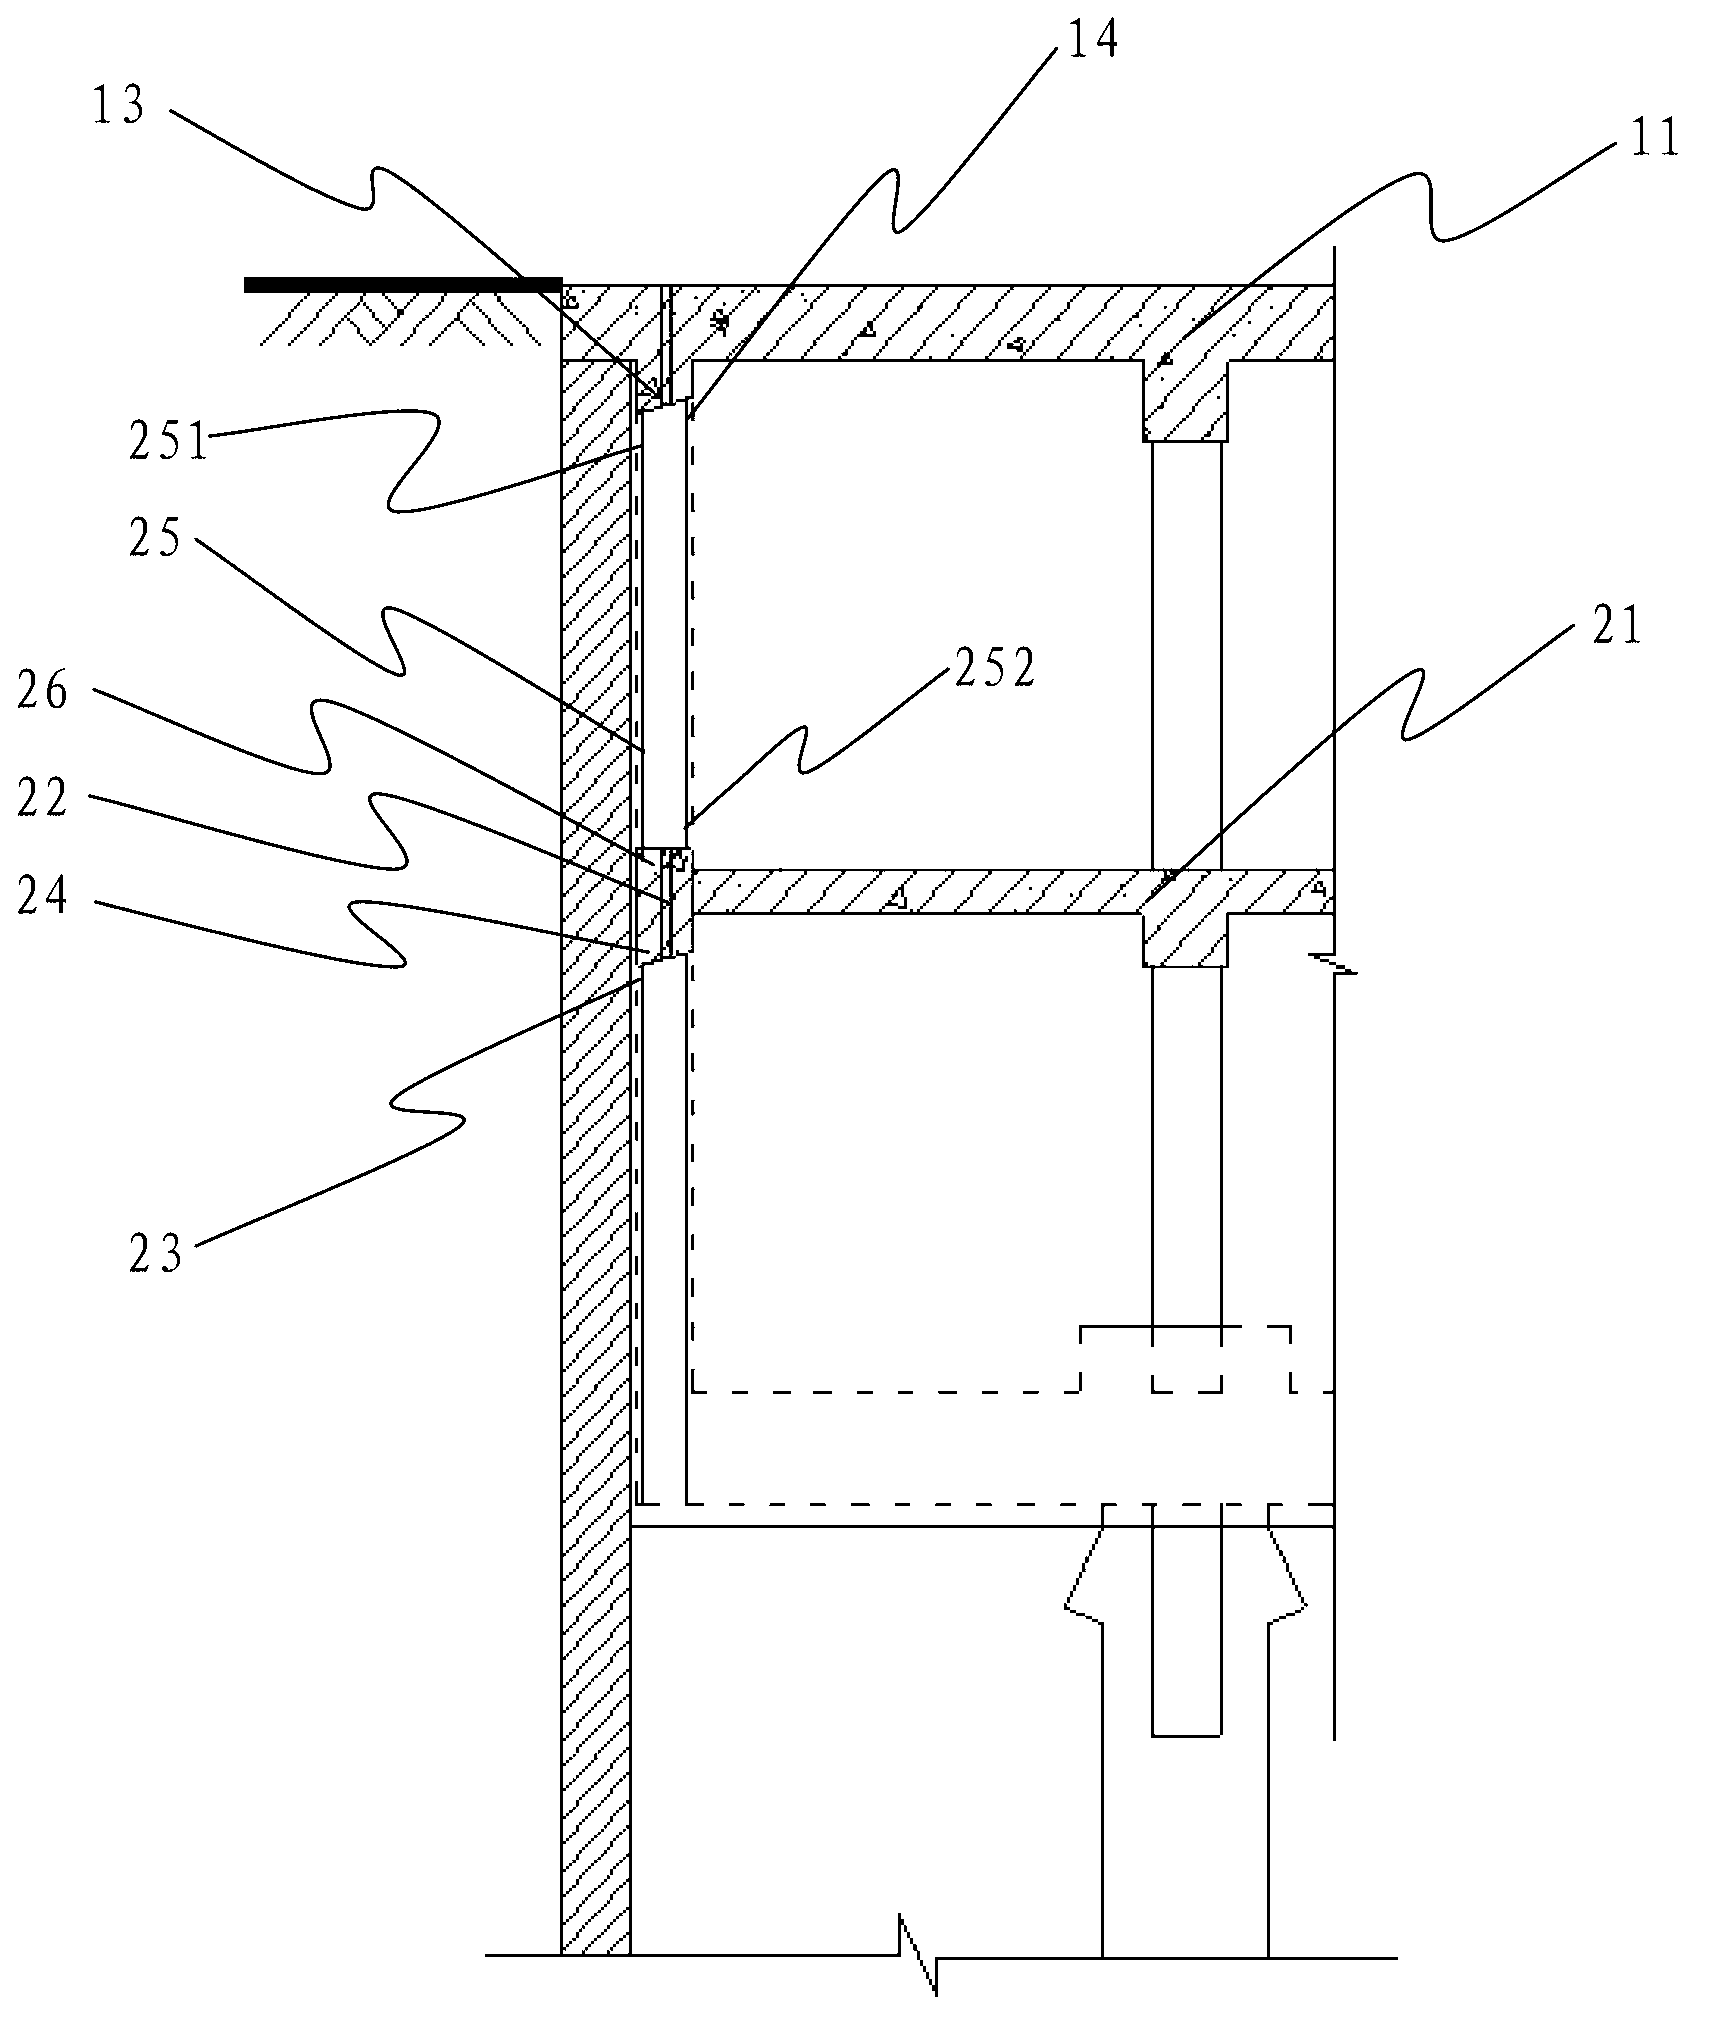 Construction method of cover-and-cut reverse construction concrete walls and columns with vertical structures